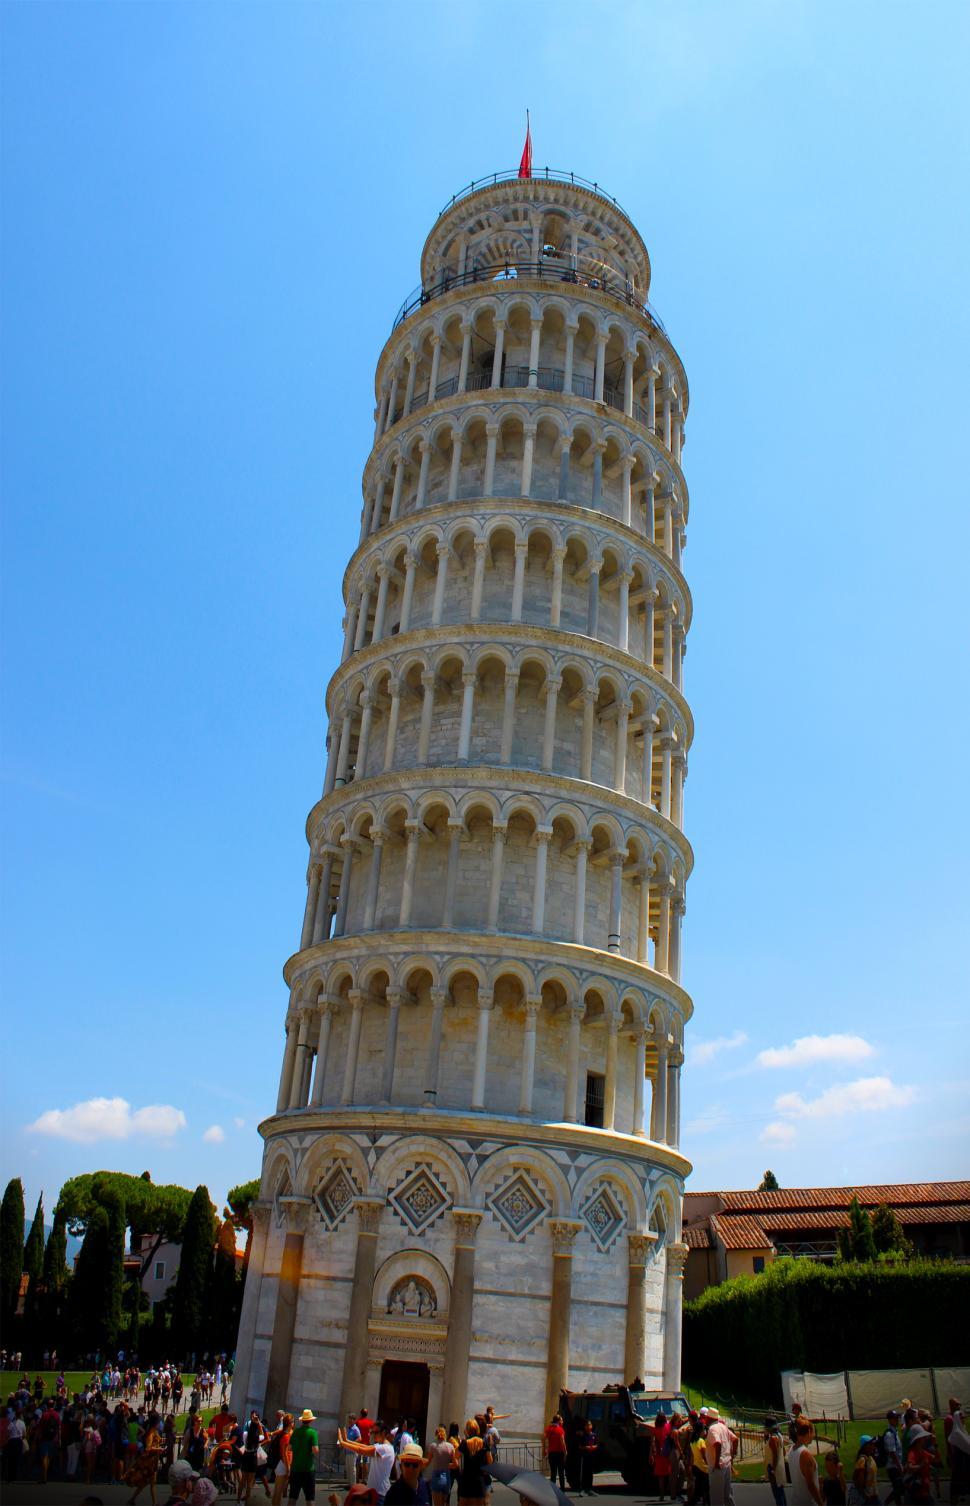 Free Image of Leaning Tower of Pisa - Campanile - Pisa - Italy 